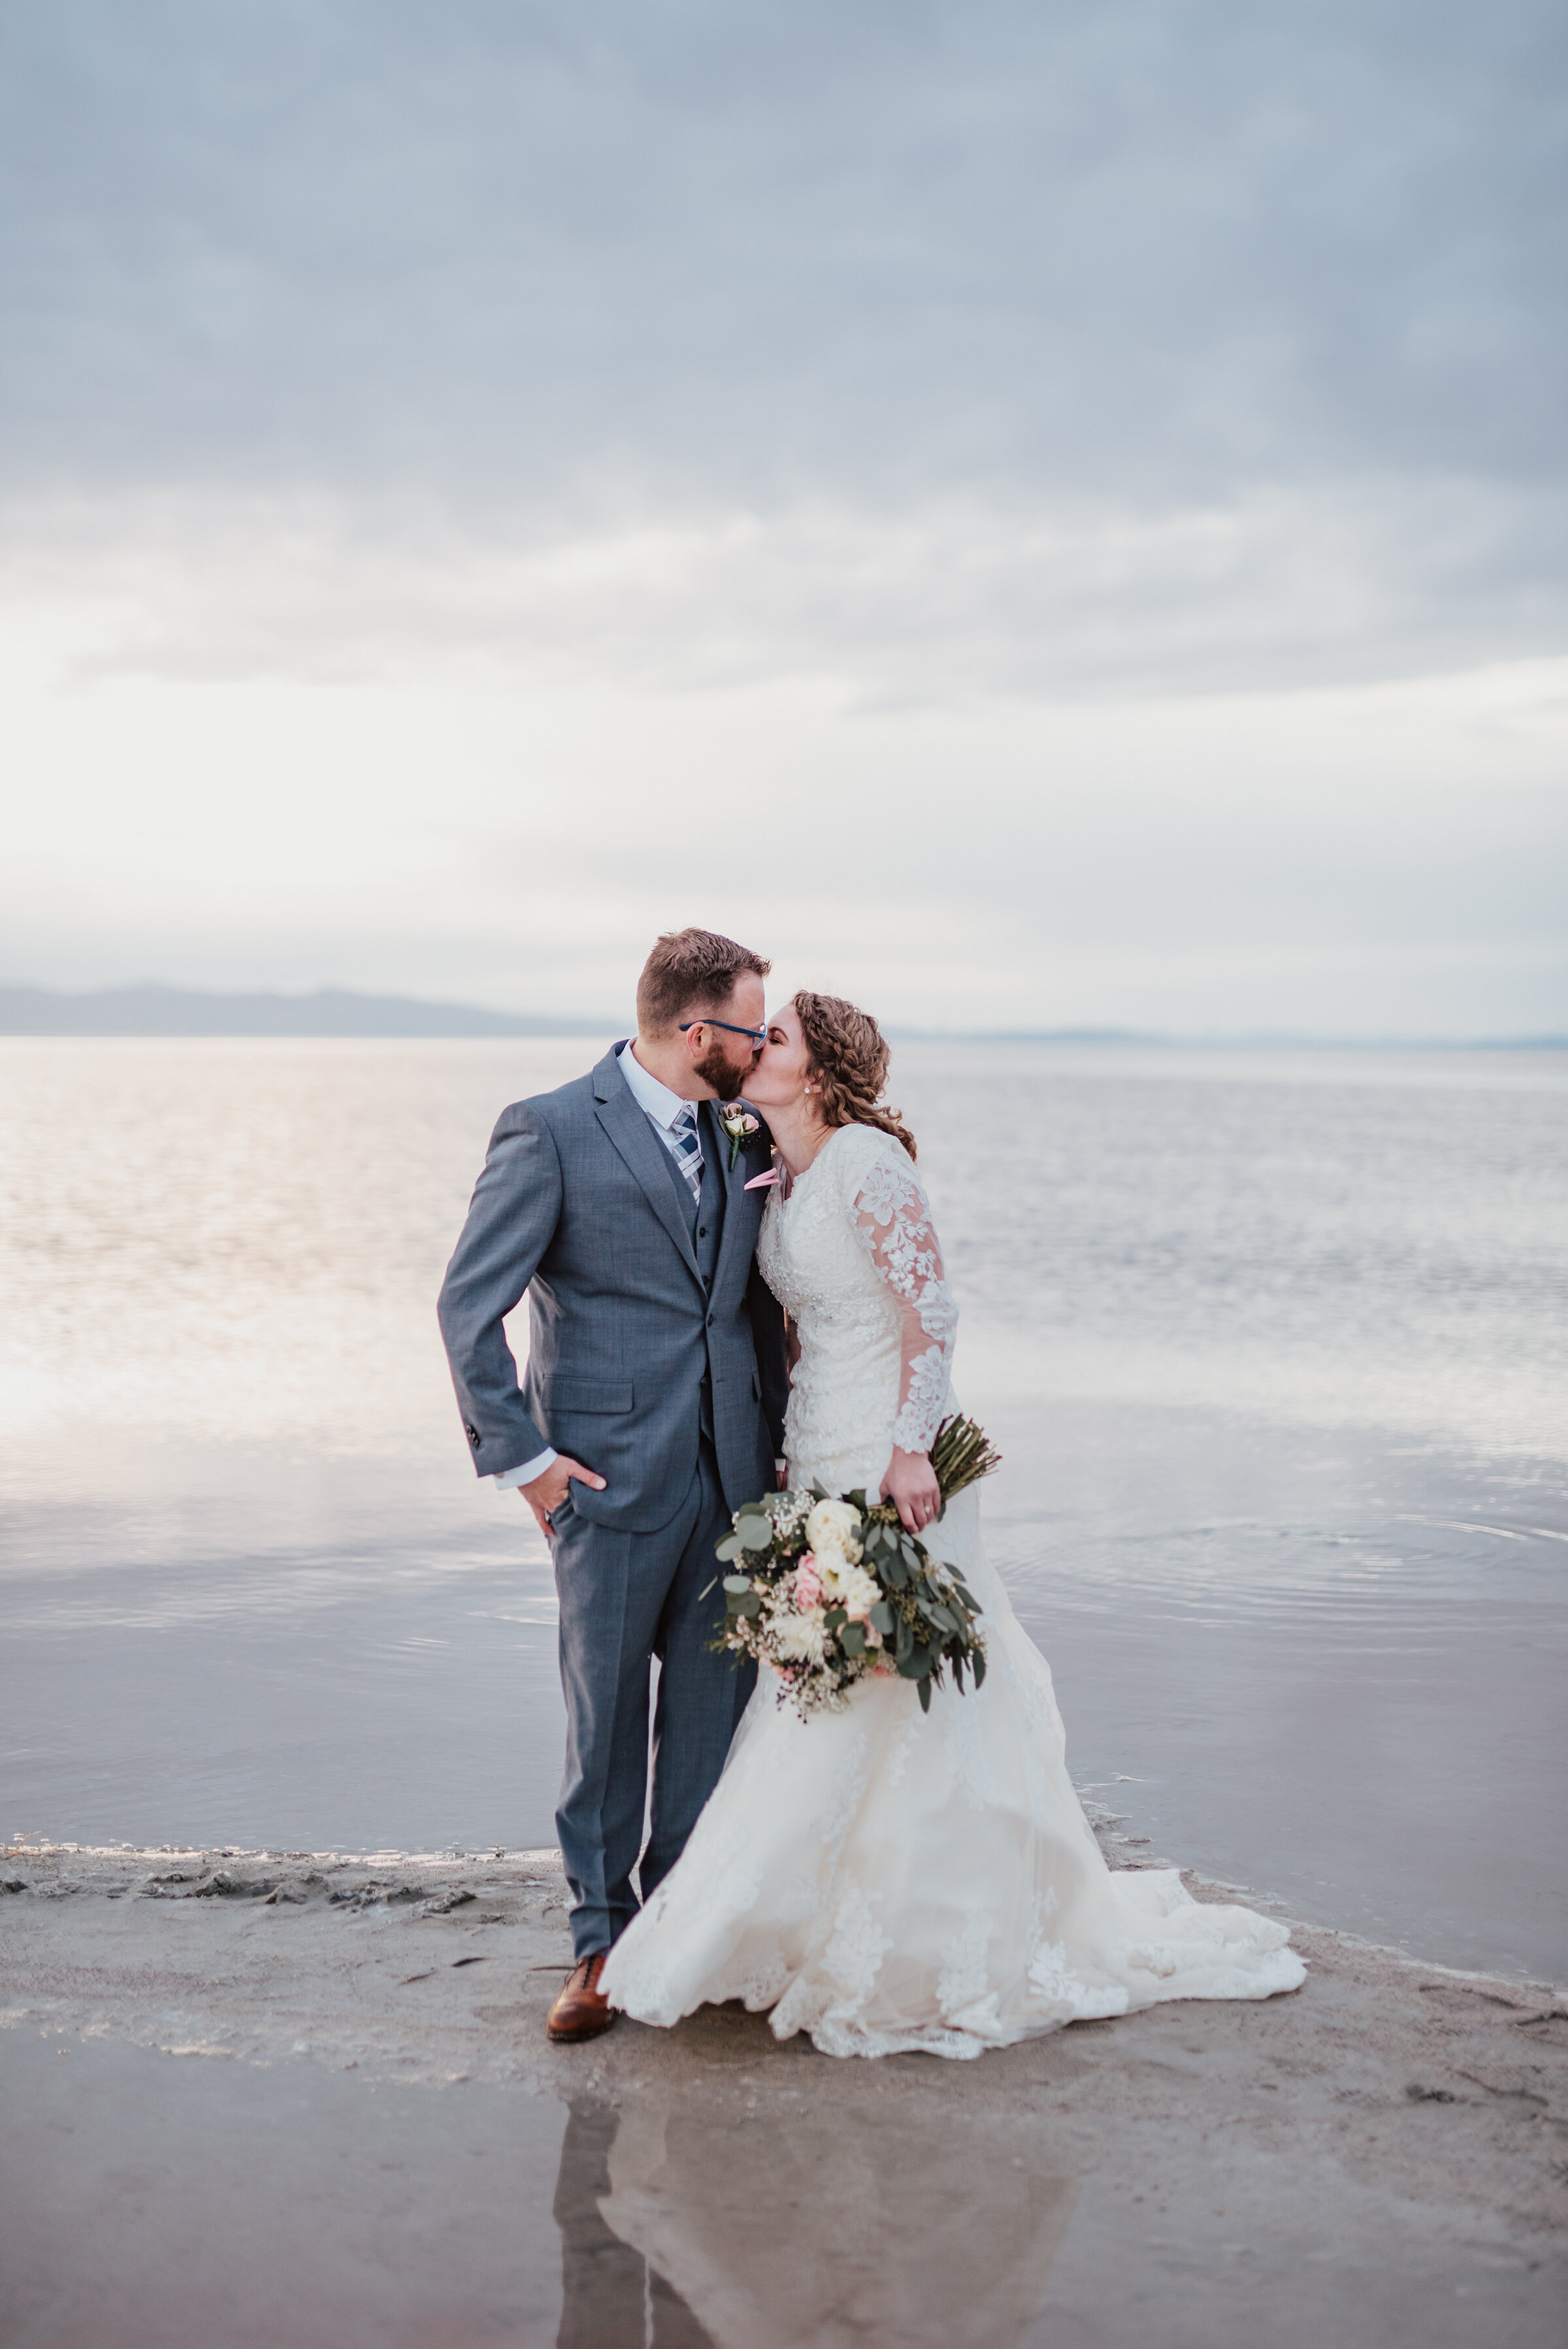  The bride and groom sharing a kiss at the Great Salt Lake Spiral Jetty as they walked through the sand. Wedding formal photoshoot in Spiral Jetty Northern Utah Great Salt Lake photography wedding formals natural photo aesthetic bride and groom #spiraljetty #utahphotography #weddingformals #gettingmarried #weddingattire #utahwedding #greatoutdoorswedding #weddingformalsphotoshoot #naturalbeauty 